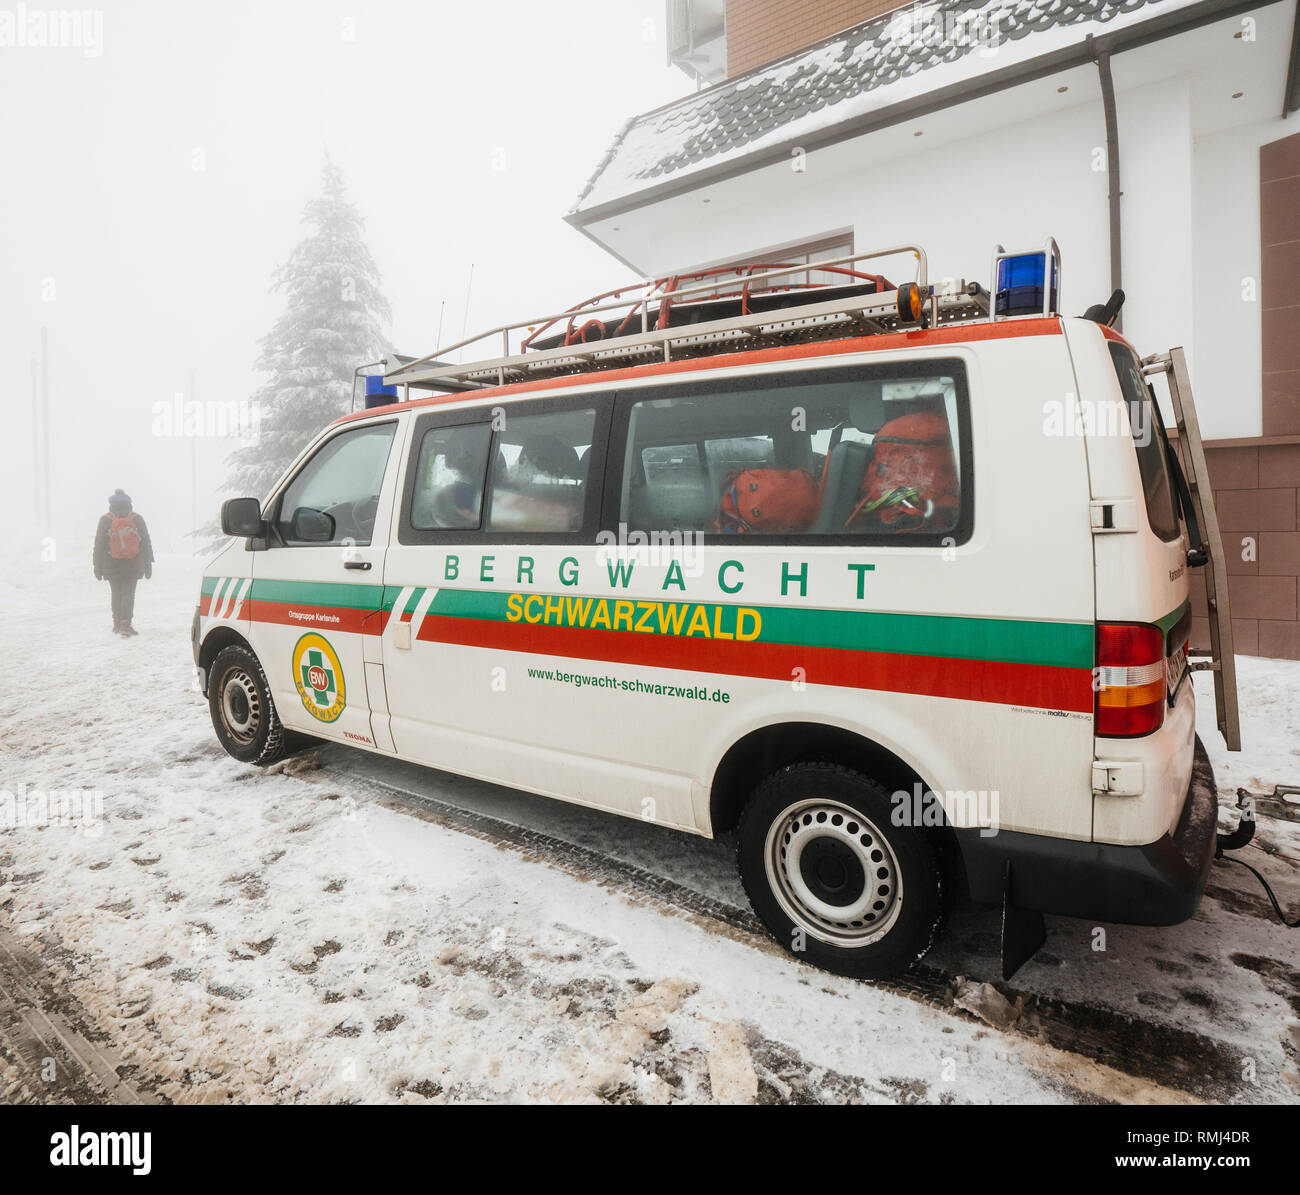 MUMMELSEE, GERMANY - JAN 26, 2019: Tourists woman near the Bergwacht Schwarzwald equipped van part of the German Red Cross (DRK-Bergwacht), whose primary functions are mountain rescue and nature conservation  Stock Photo